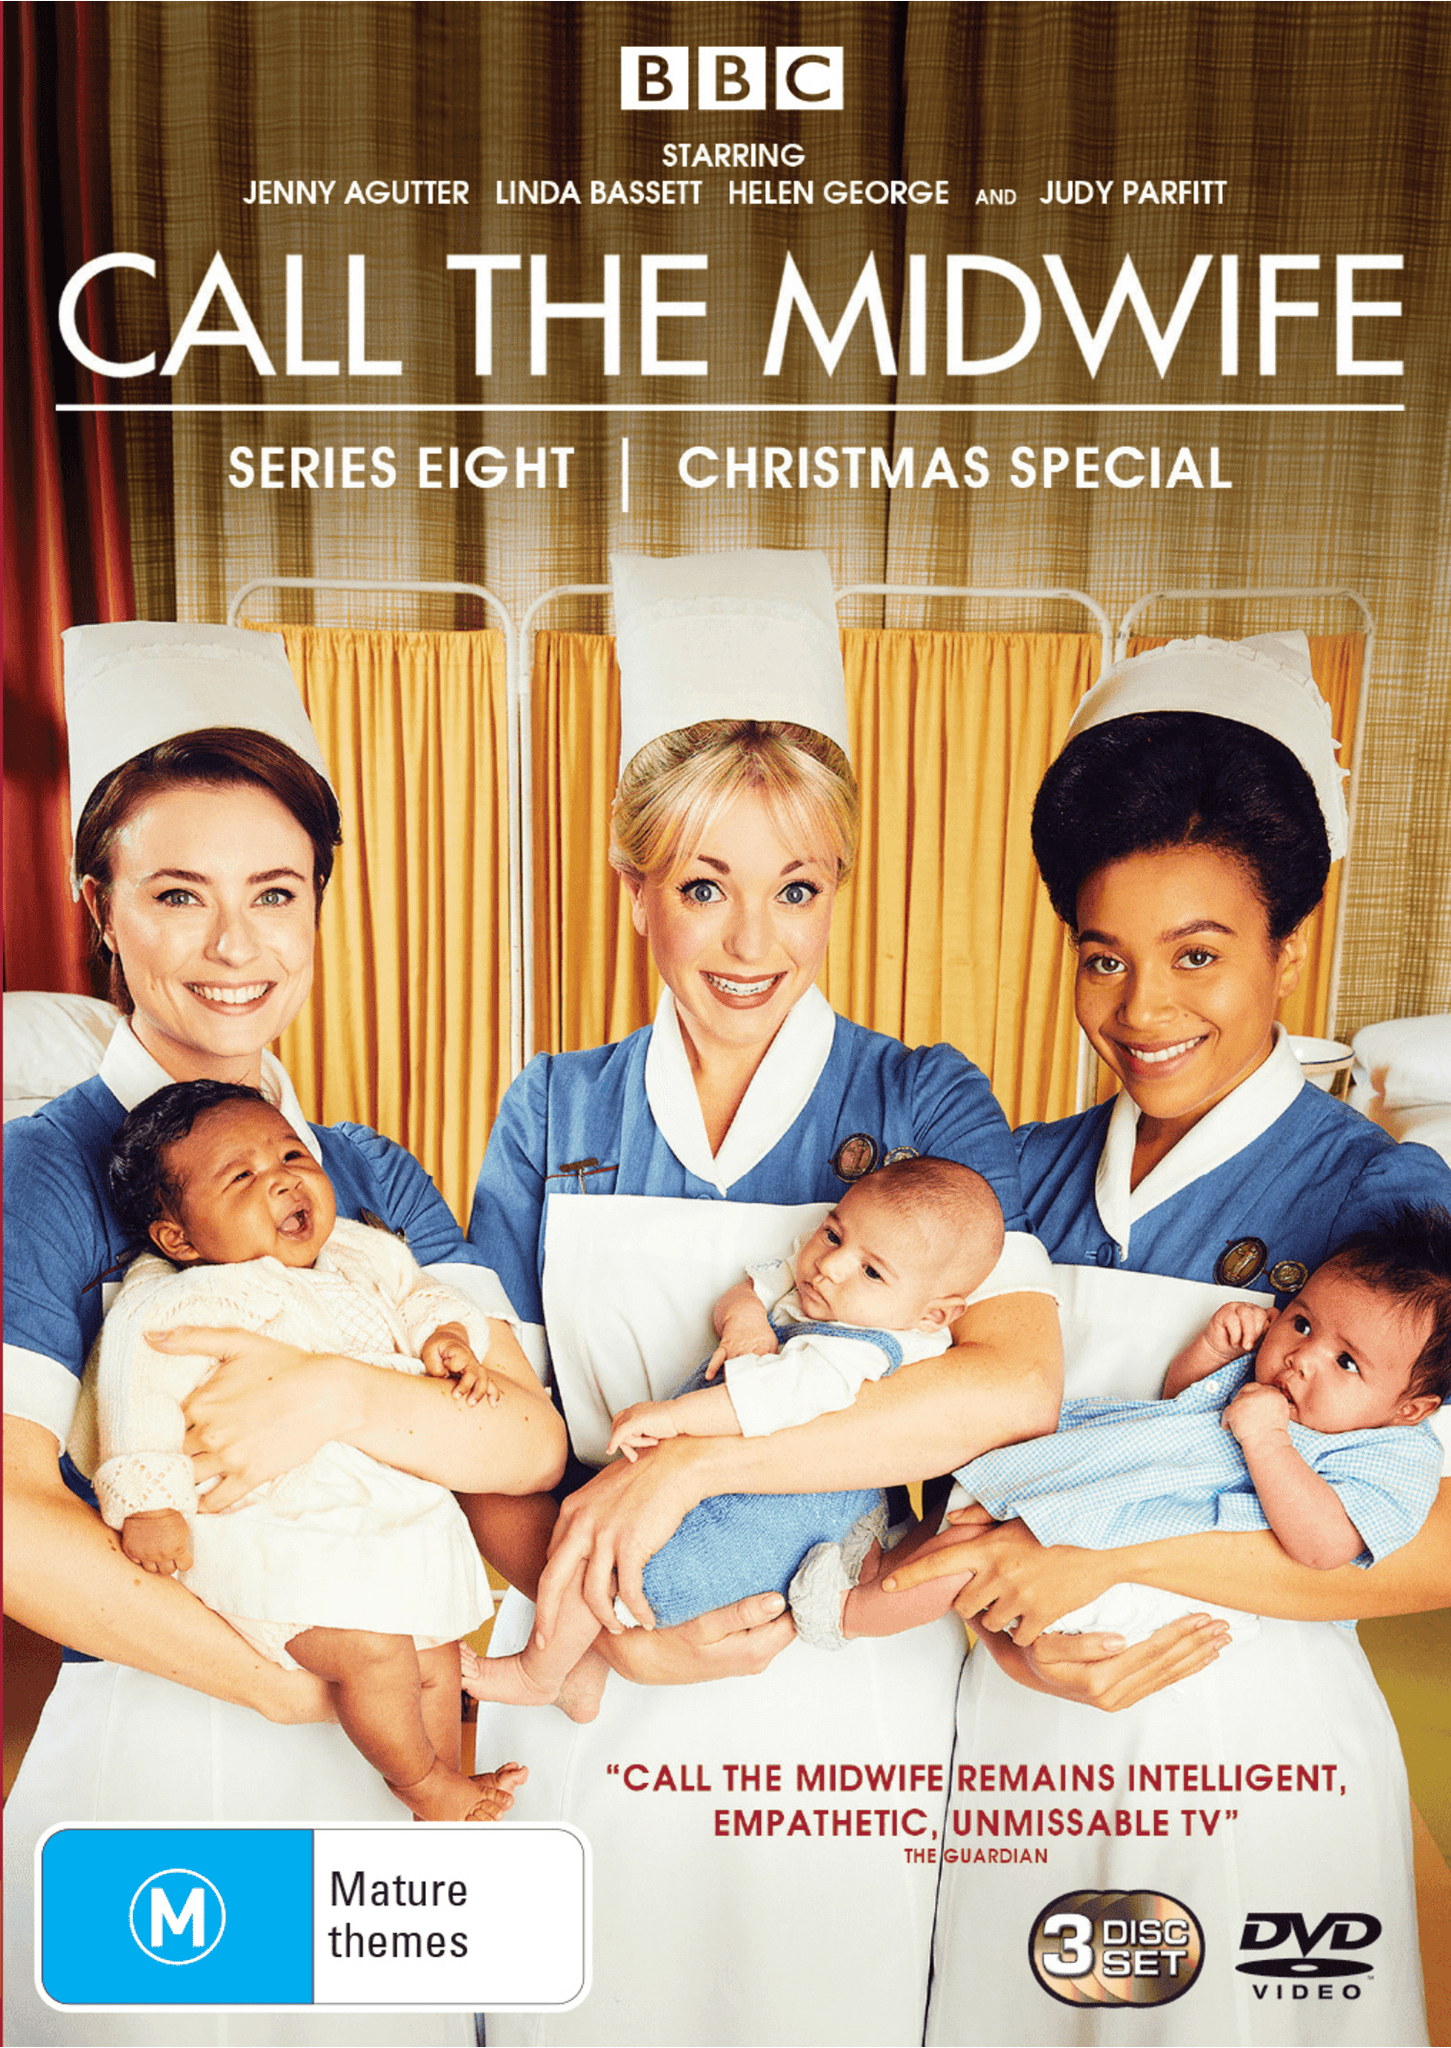 CALL THE MIDWIFE: SERIES 8